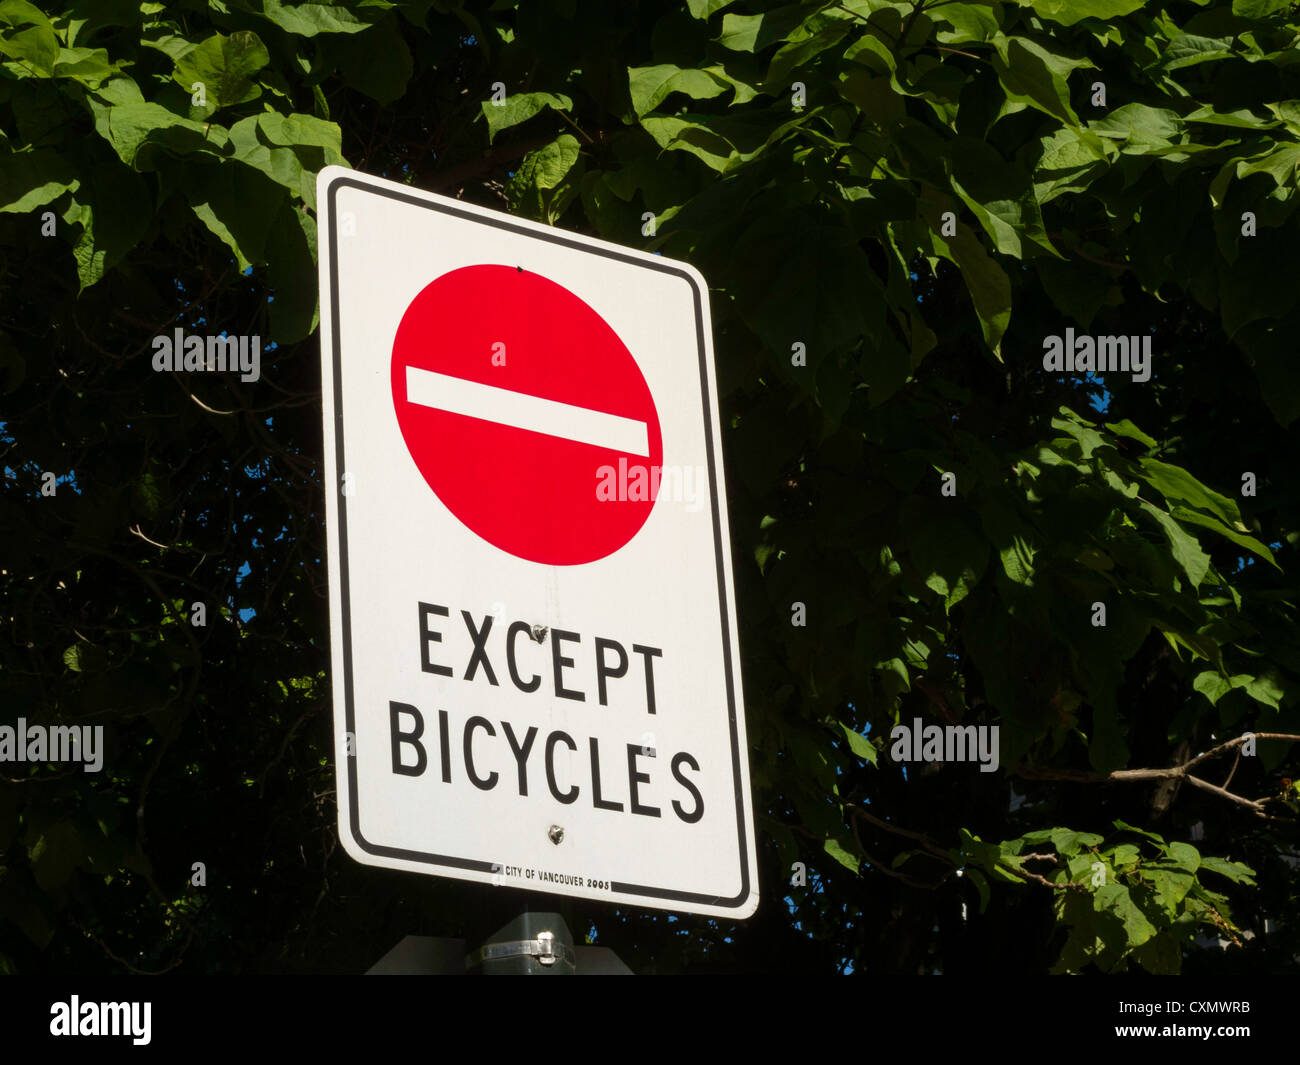 Except Bicycles Road Sign Stock Photo